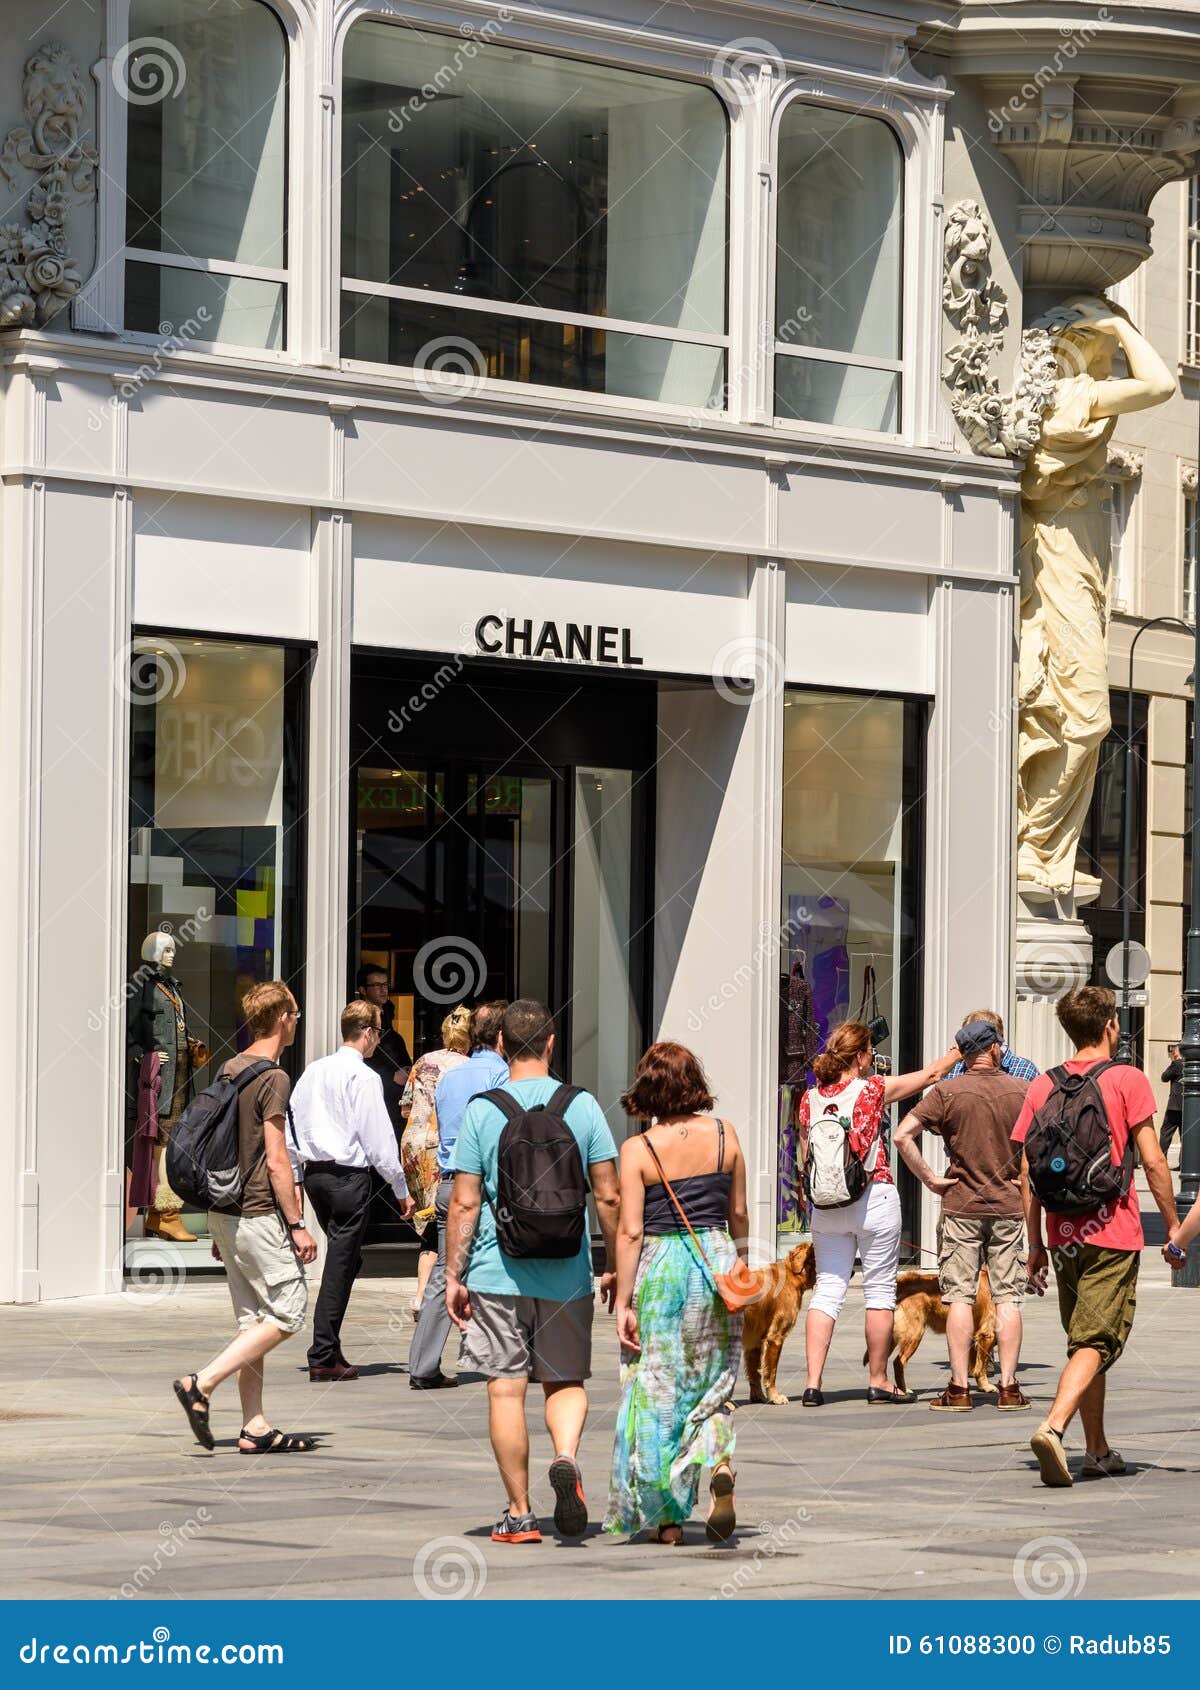 chanel retailers near me